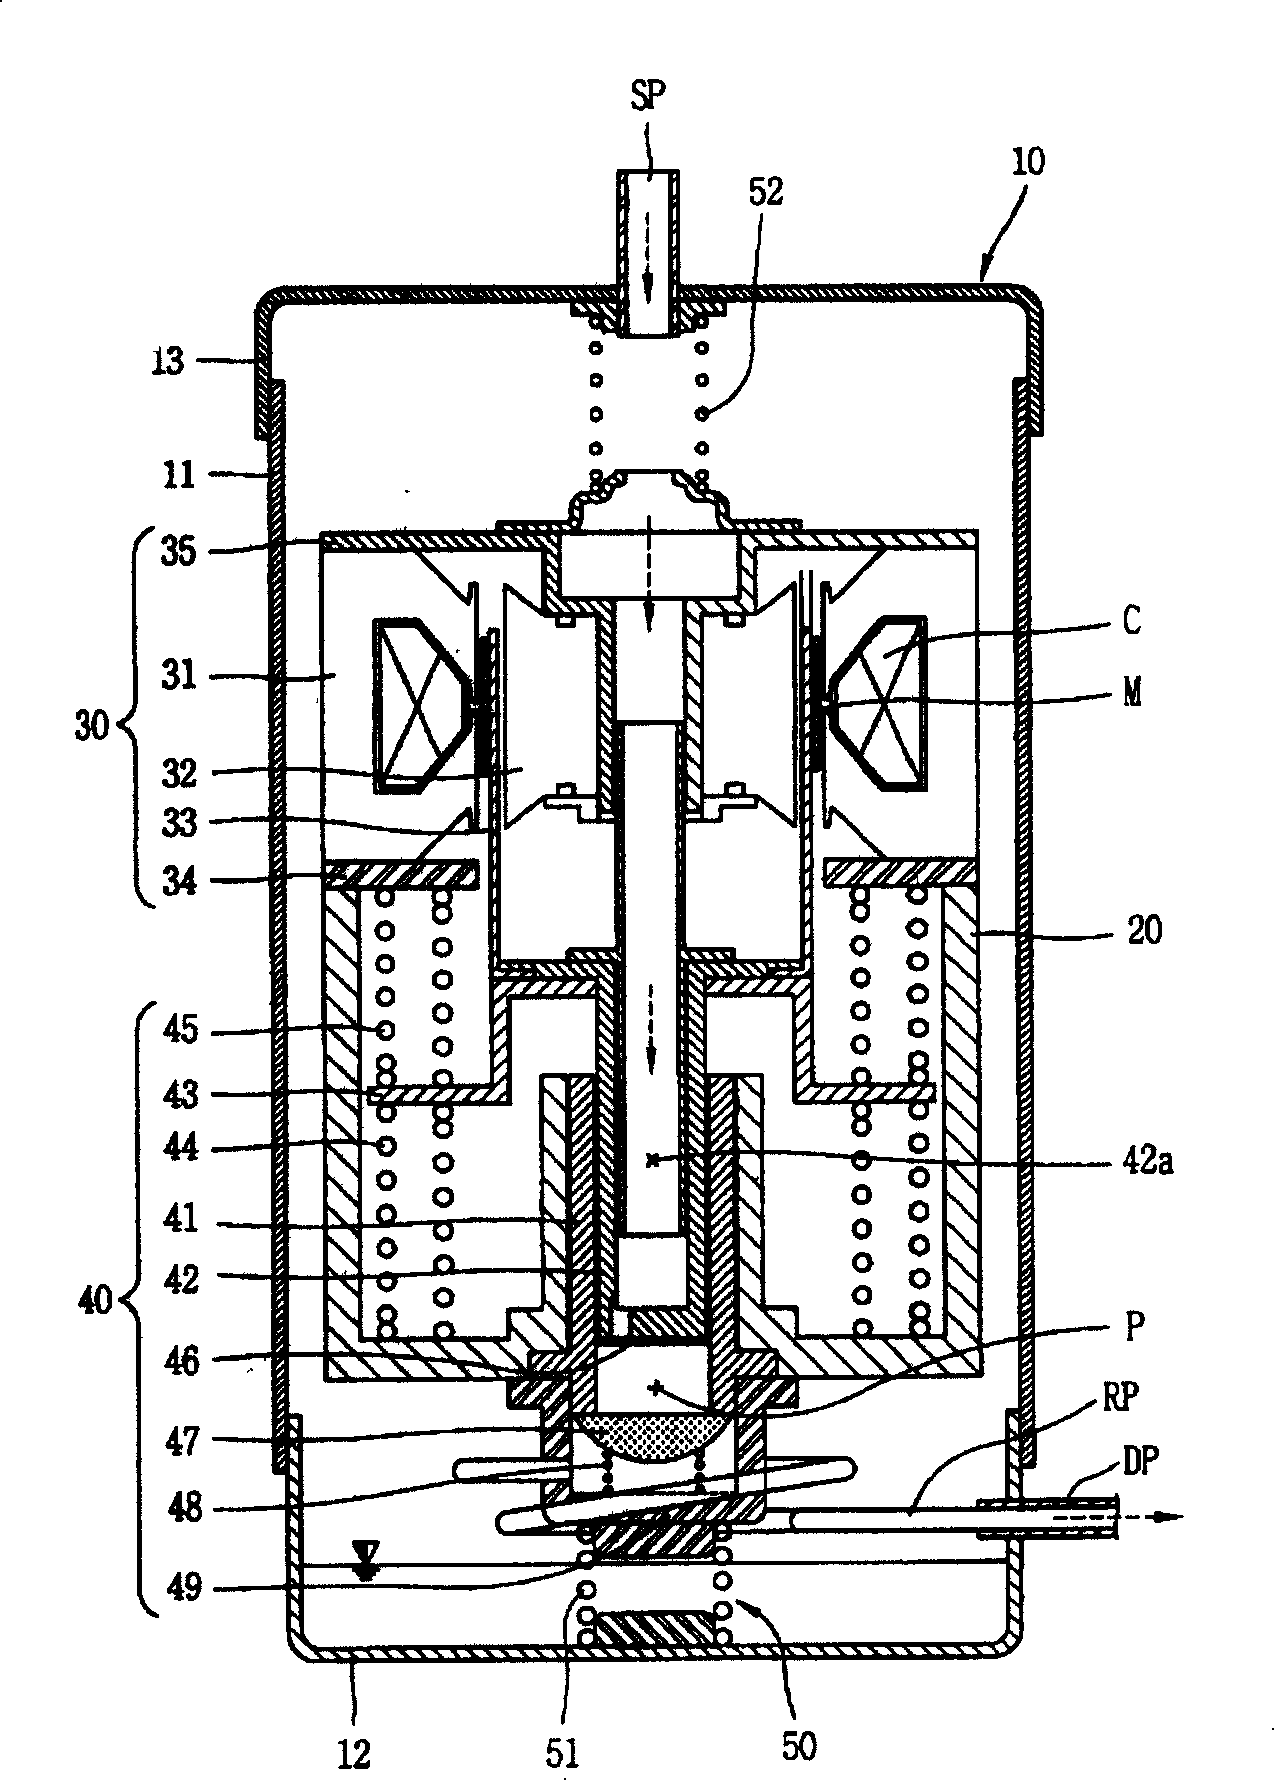 Supporting apparatus for reciprocating compressor